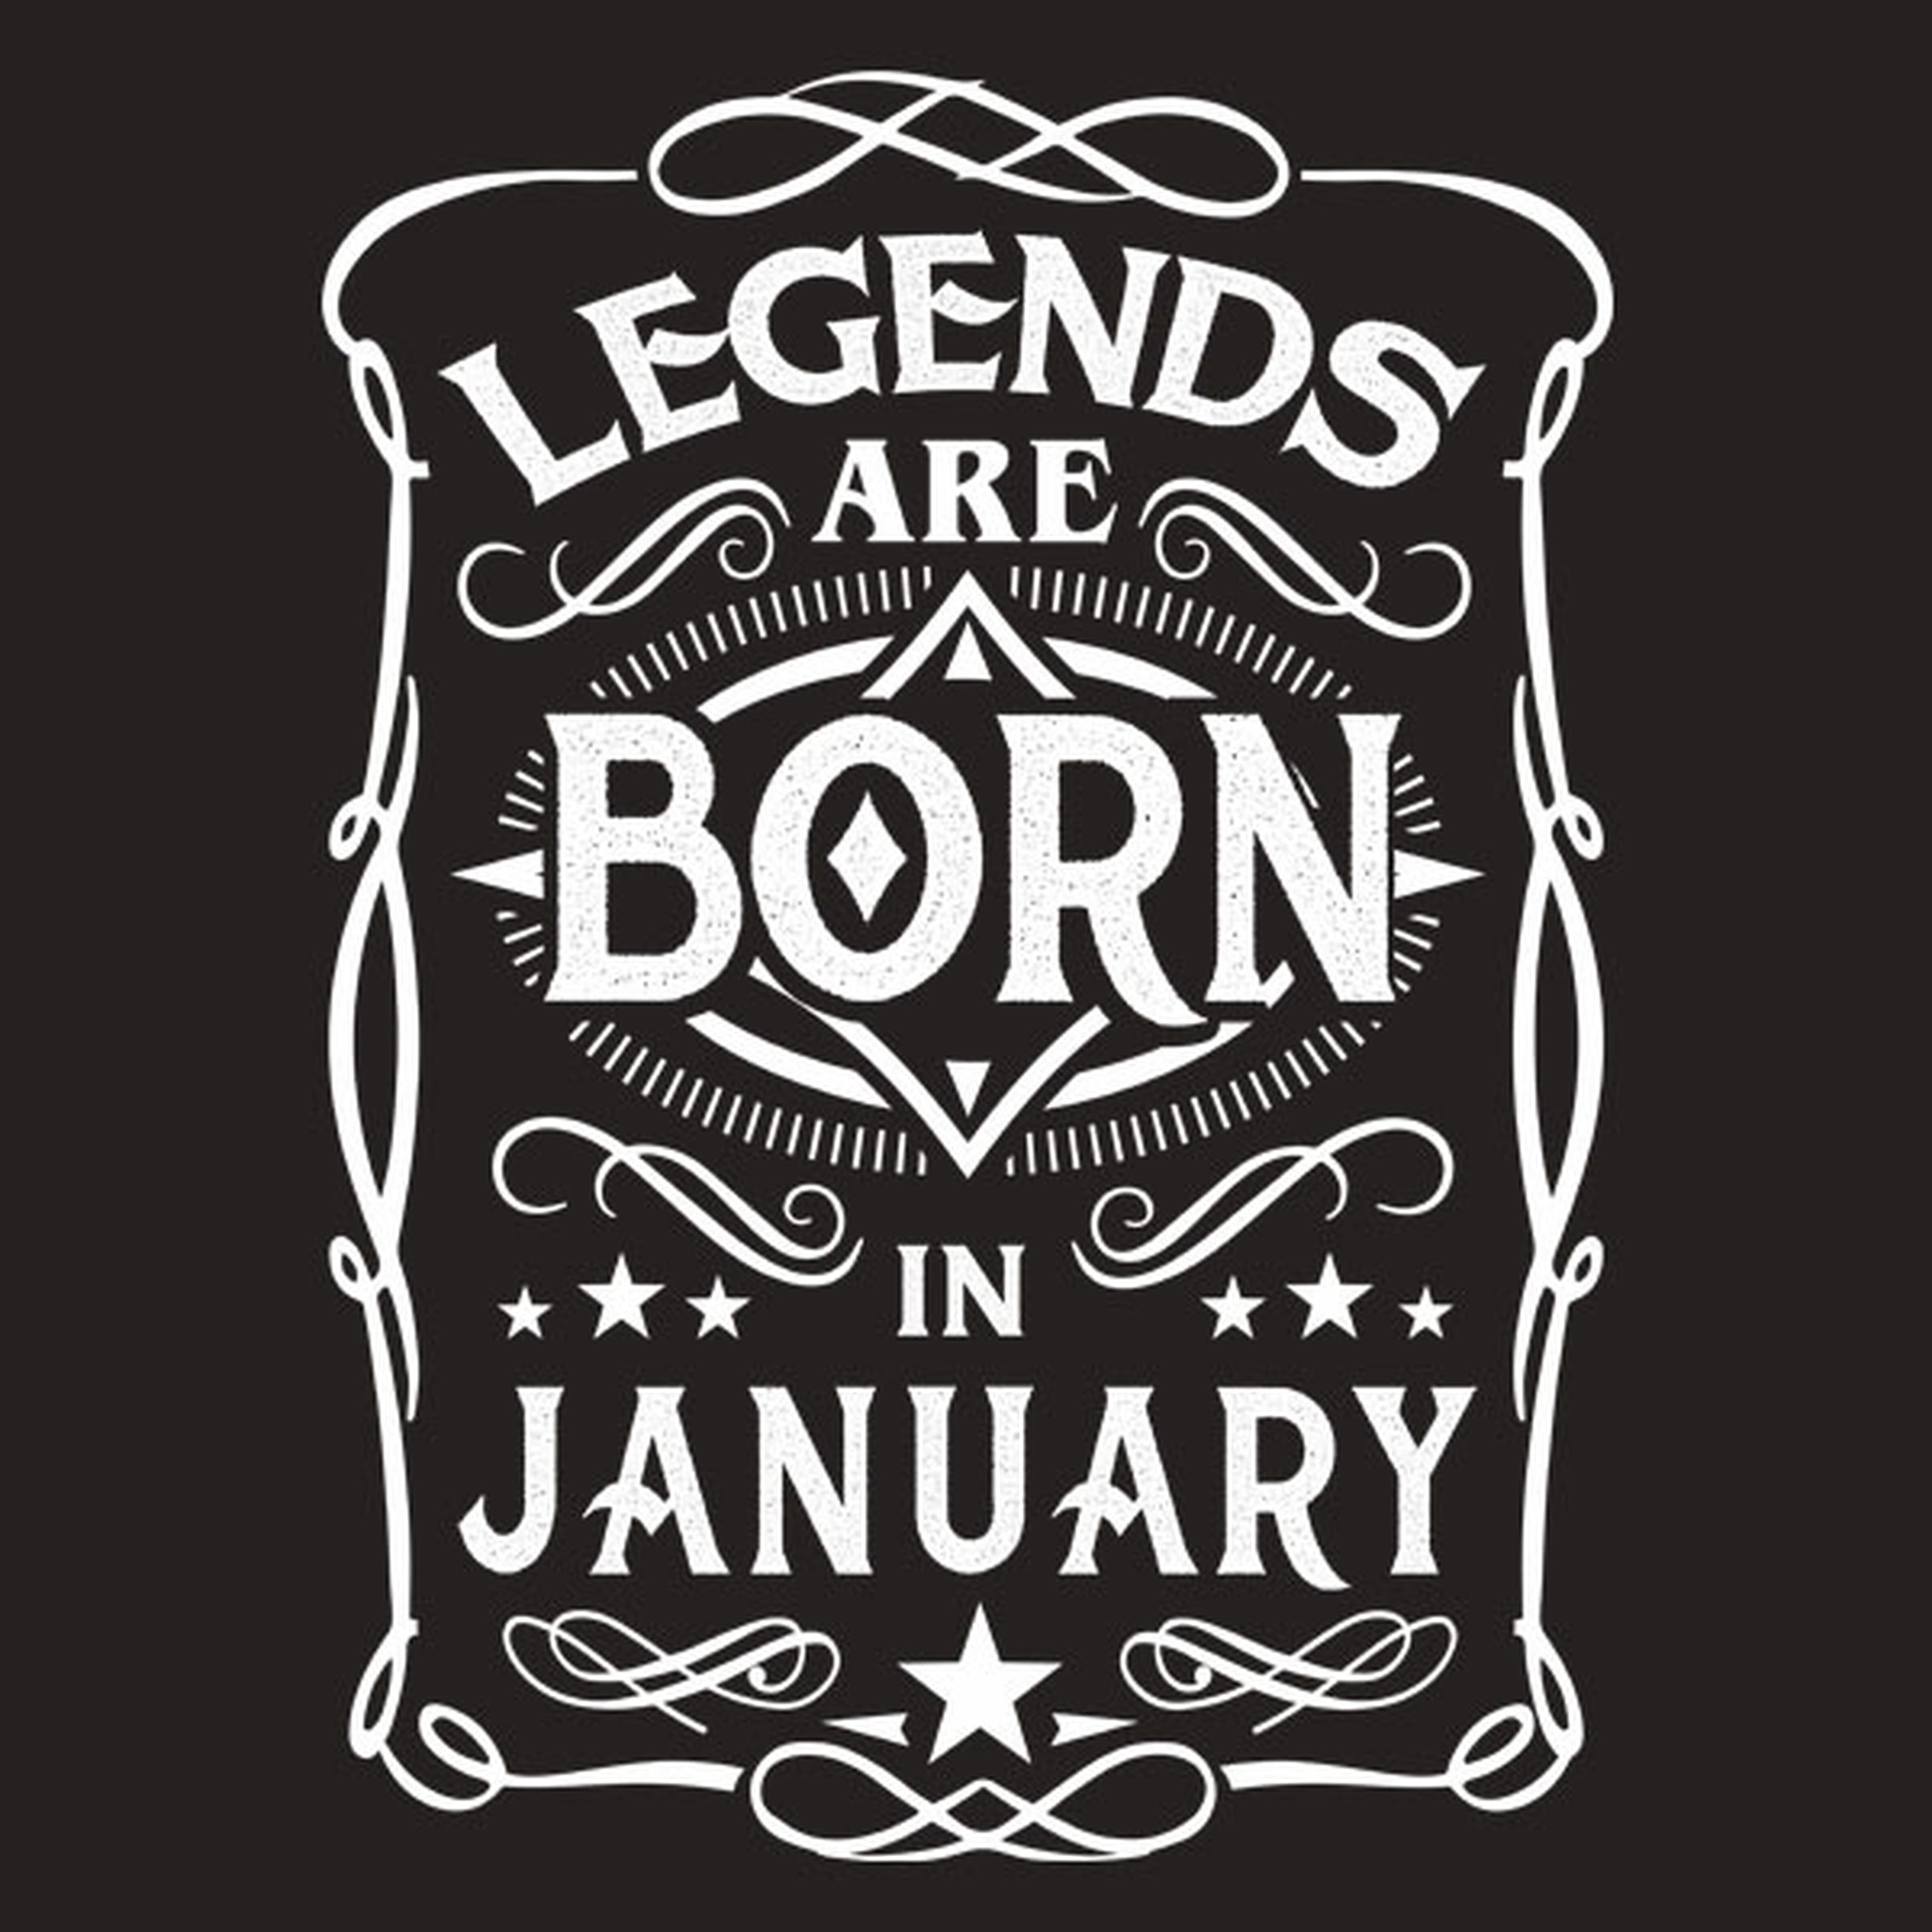 Legends are born in January - T-shirt